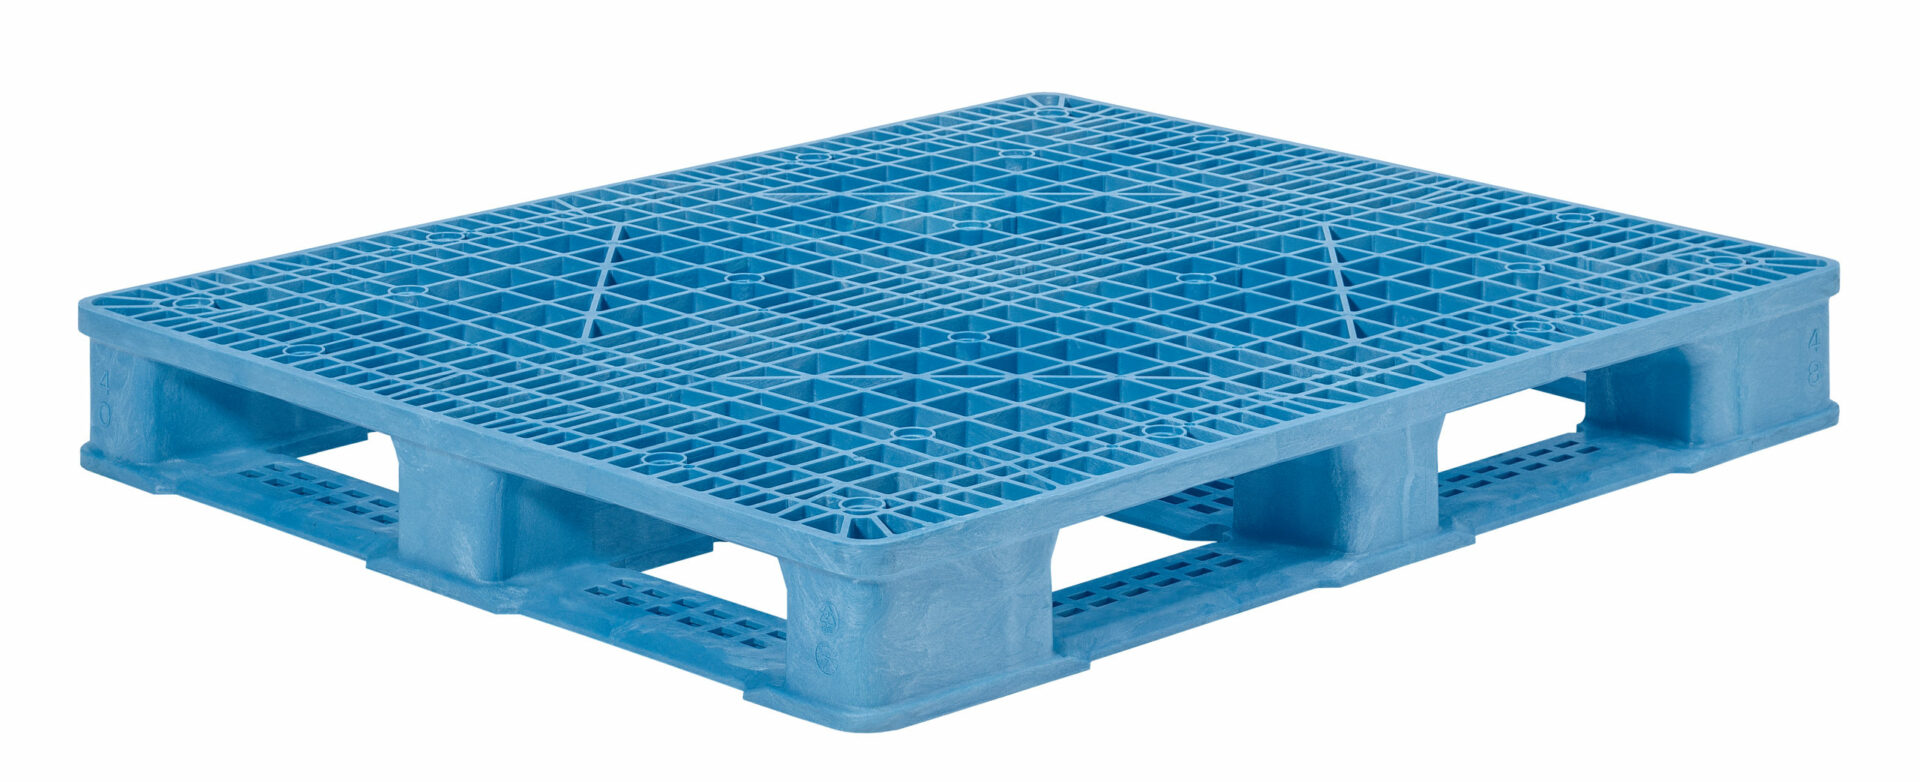 Plastic Pallets: An Eco-Friendly Solution for Material Handling